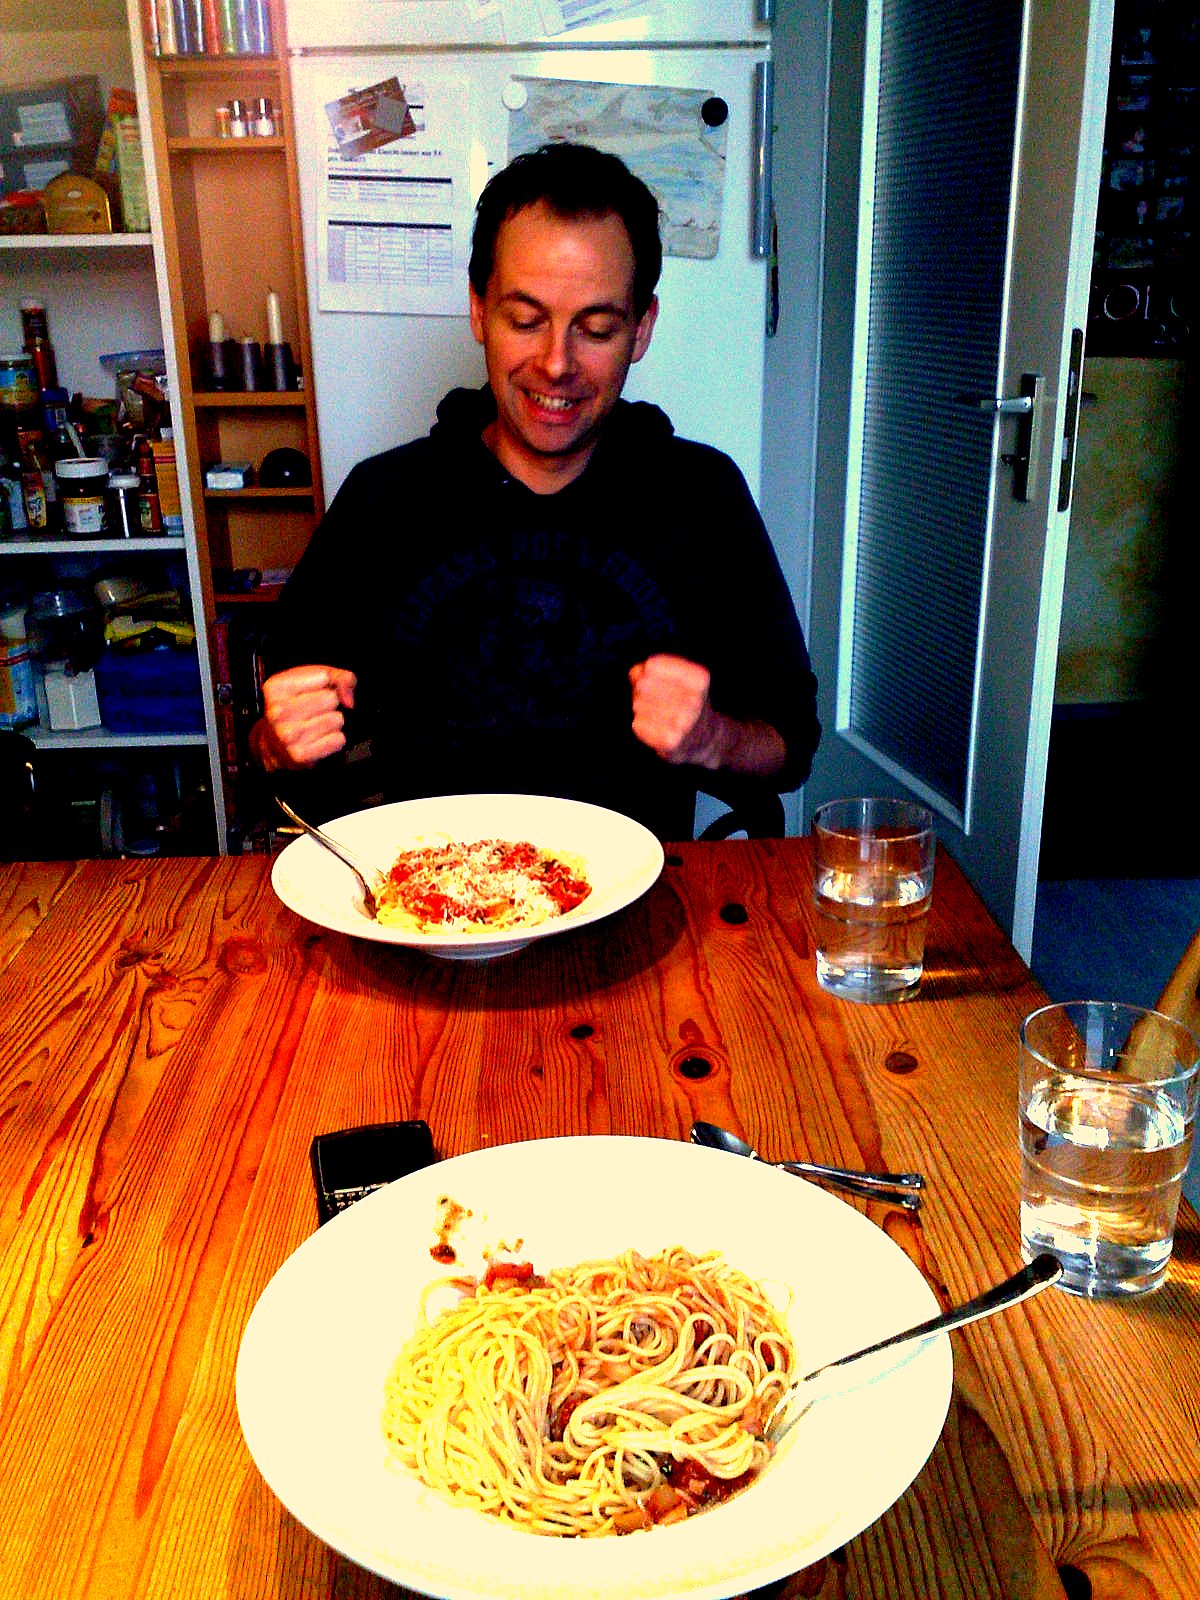 Lunch of Pasta with Frank